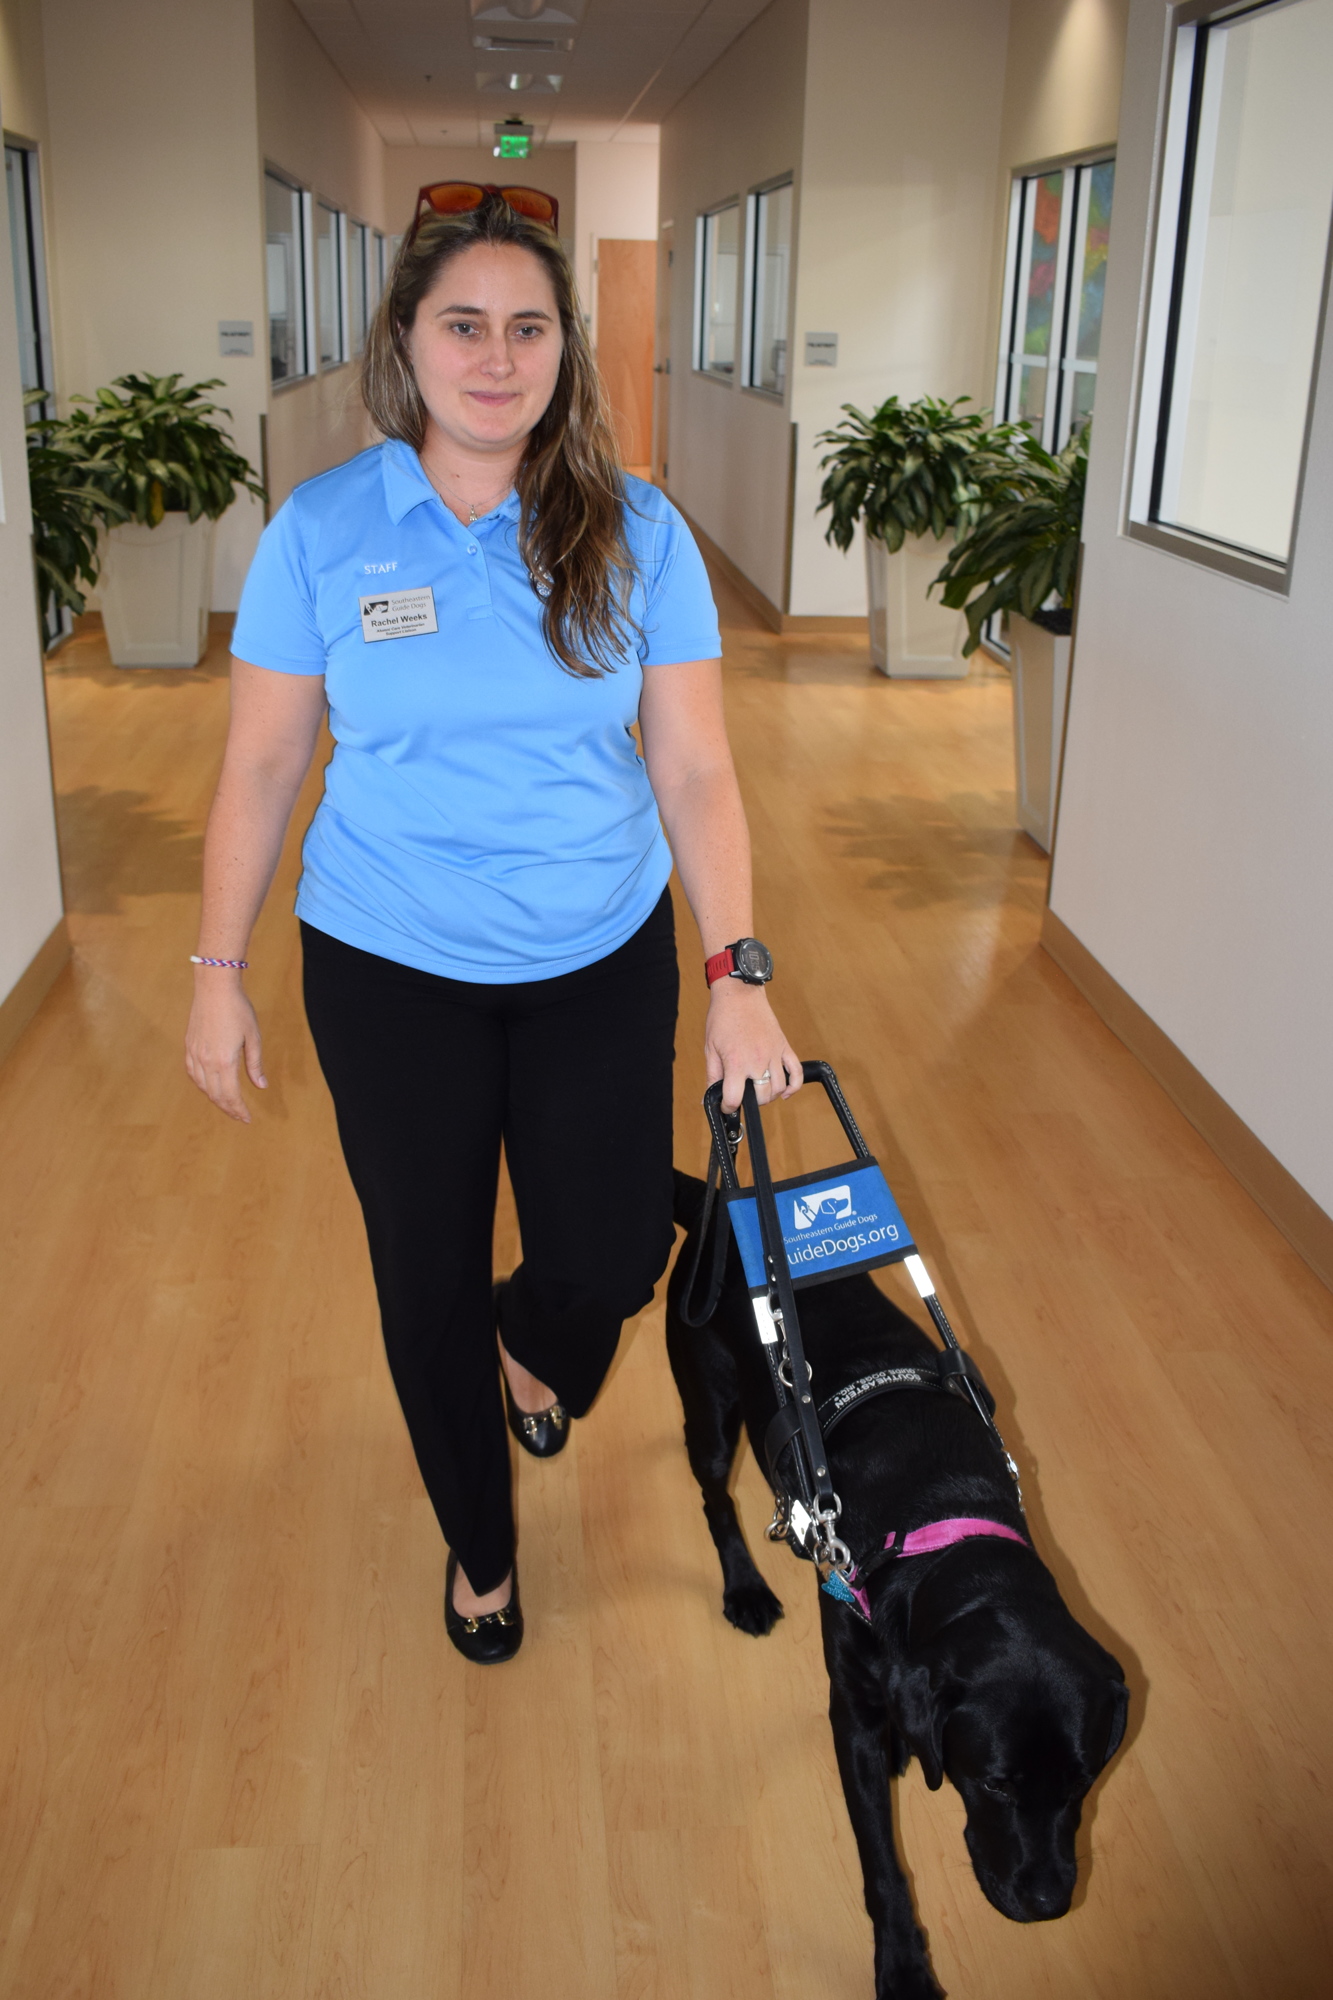 Rachel Weeks and Plum head to another office at Southeastern Guide Dogs in Palmetto.